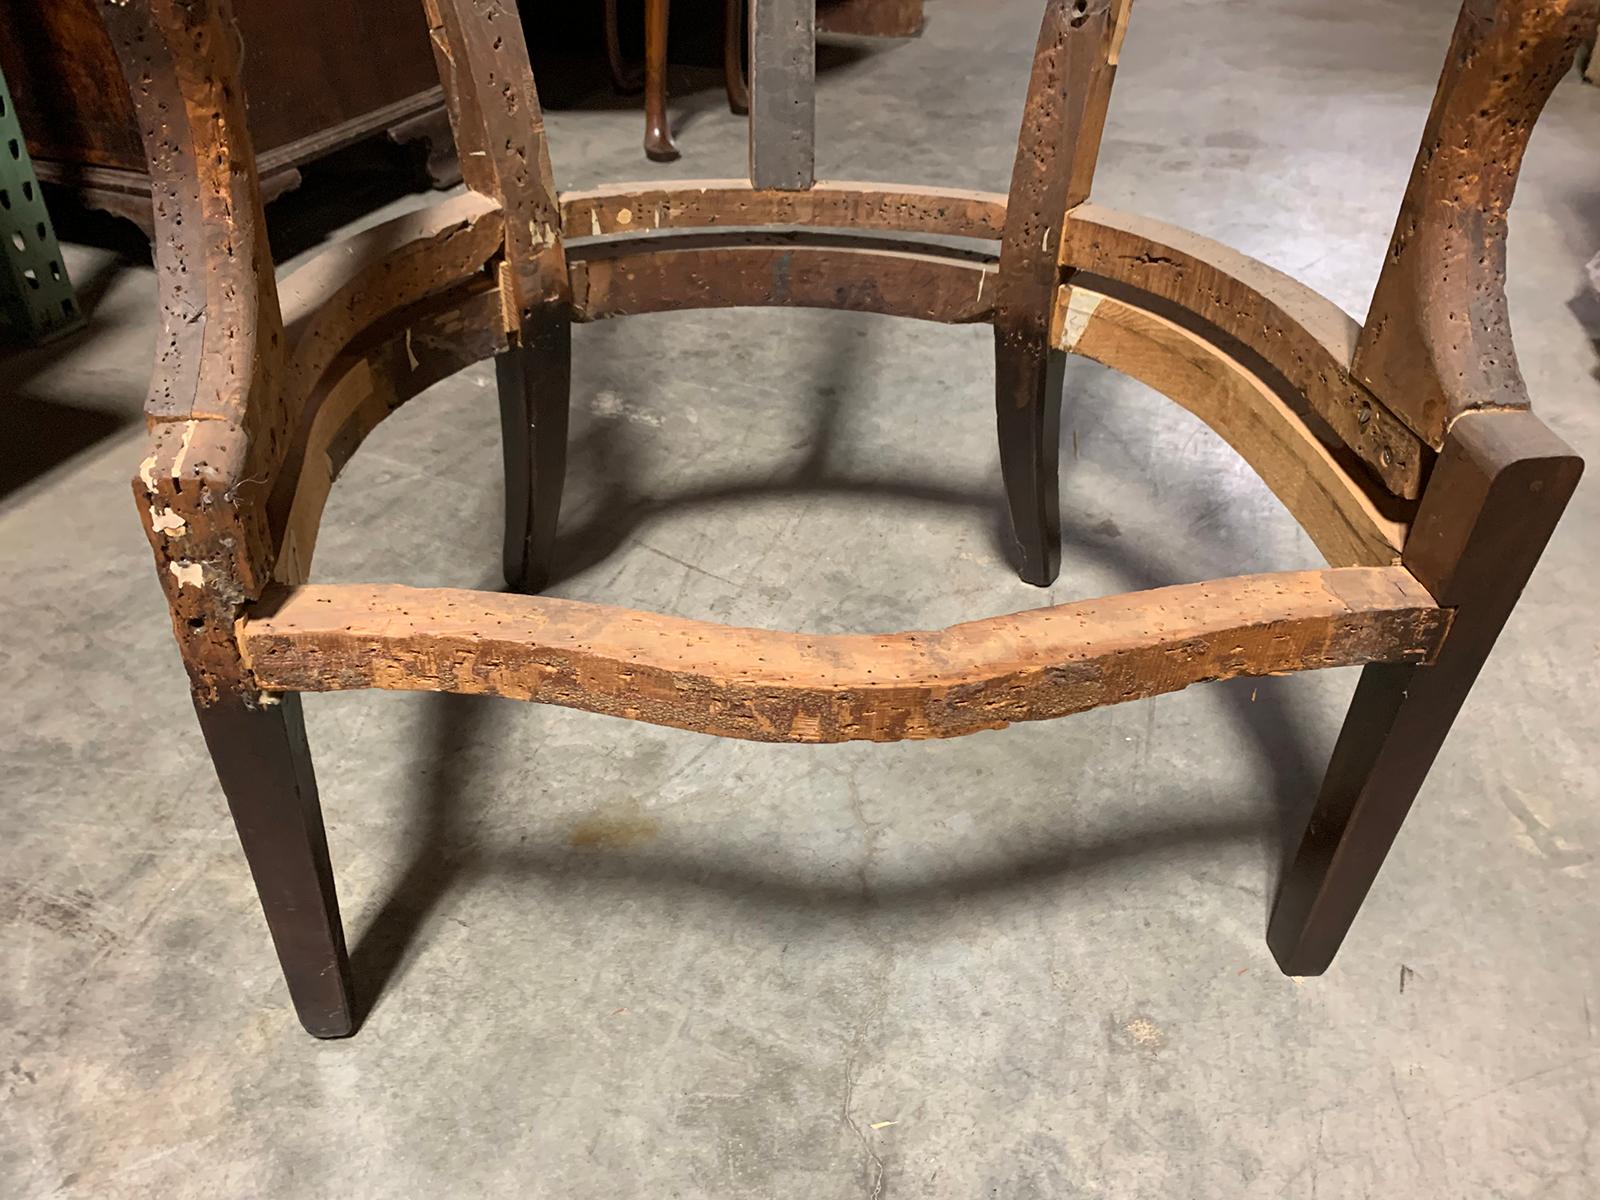 Large Scale 18th-19th Century English Barrel Wingback Chair Frame For Sale 4